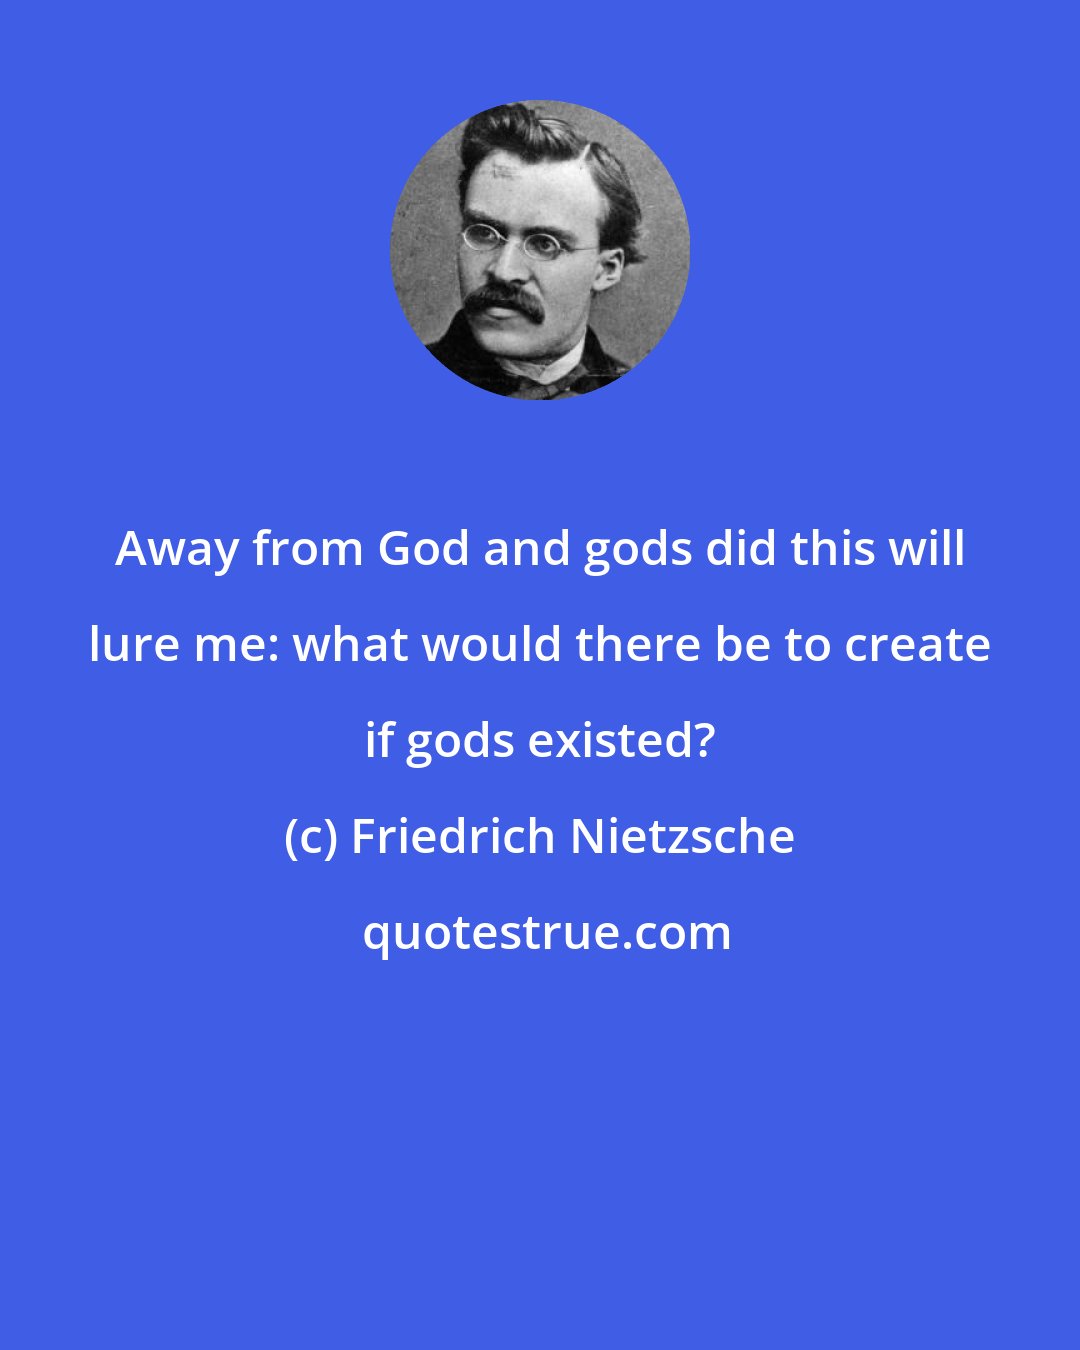 Friedrich Nietzsche: Away from God and gods did this will lure me: what would there be to create if gods existed?